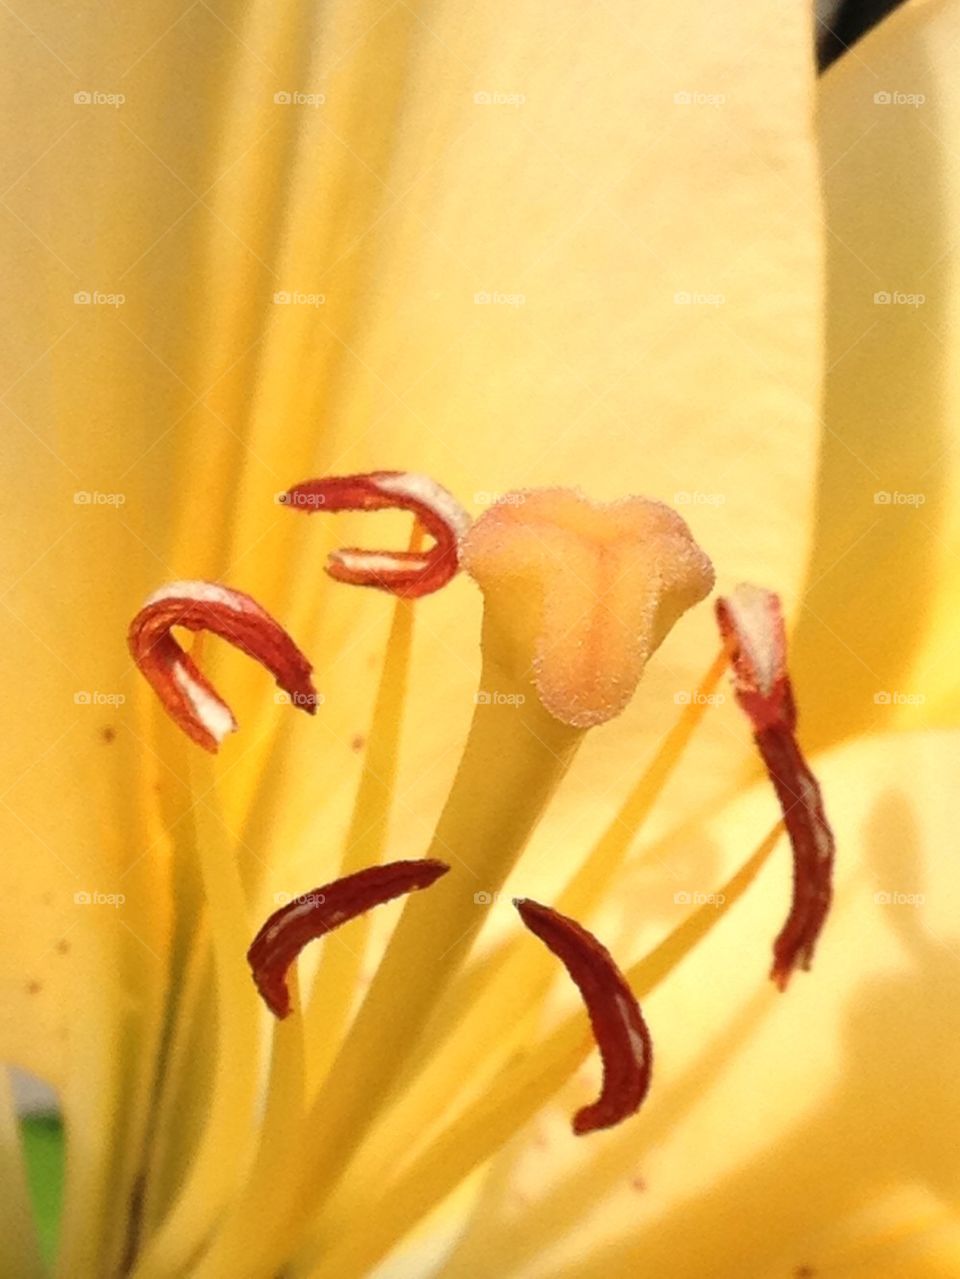 DAY LILY CLOSE UP STAMEN